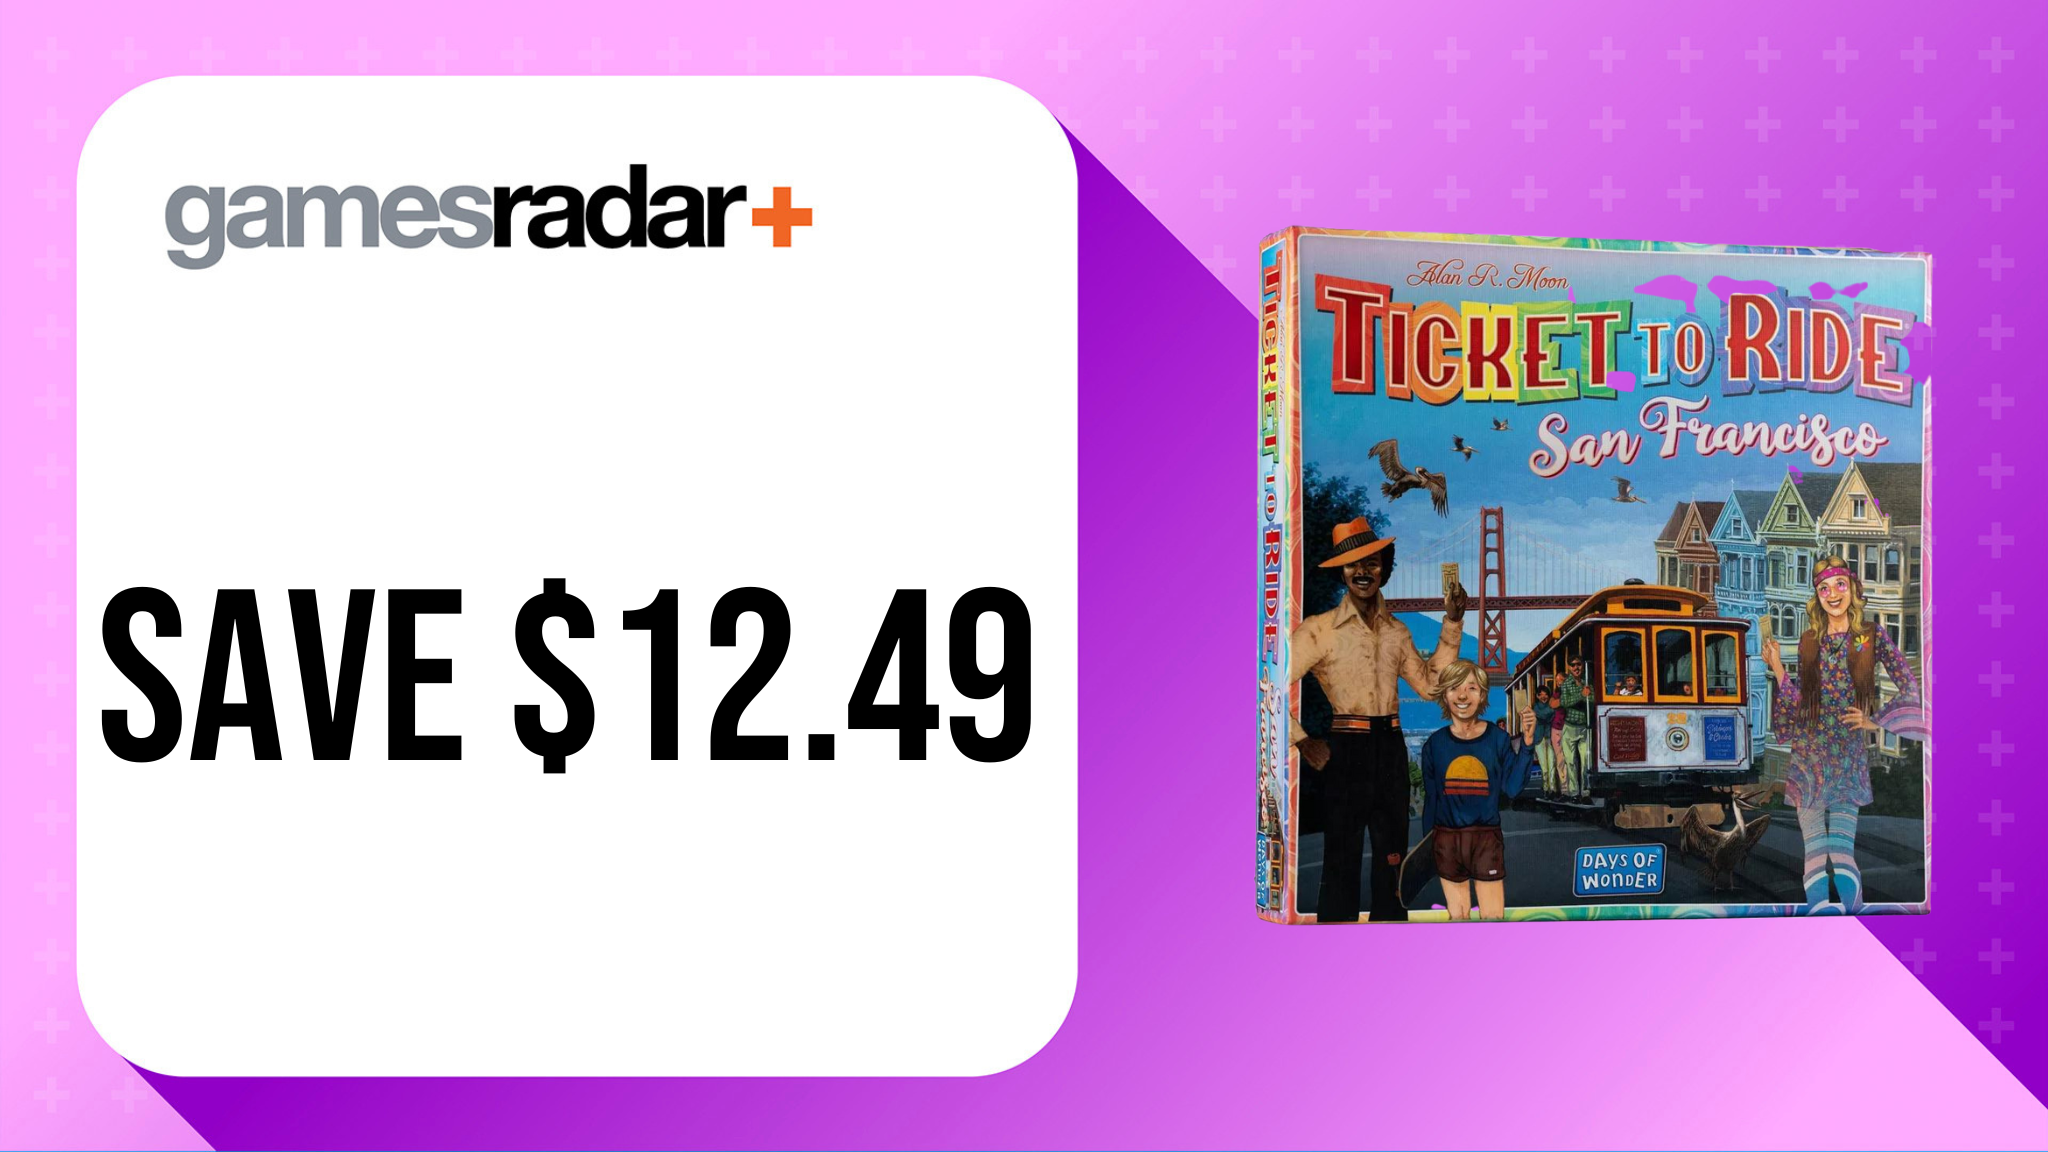 Ticket to ride San Francisco deal image with £12 saving and purple background